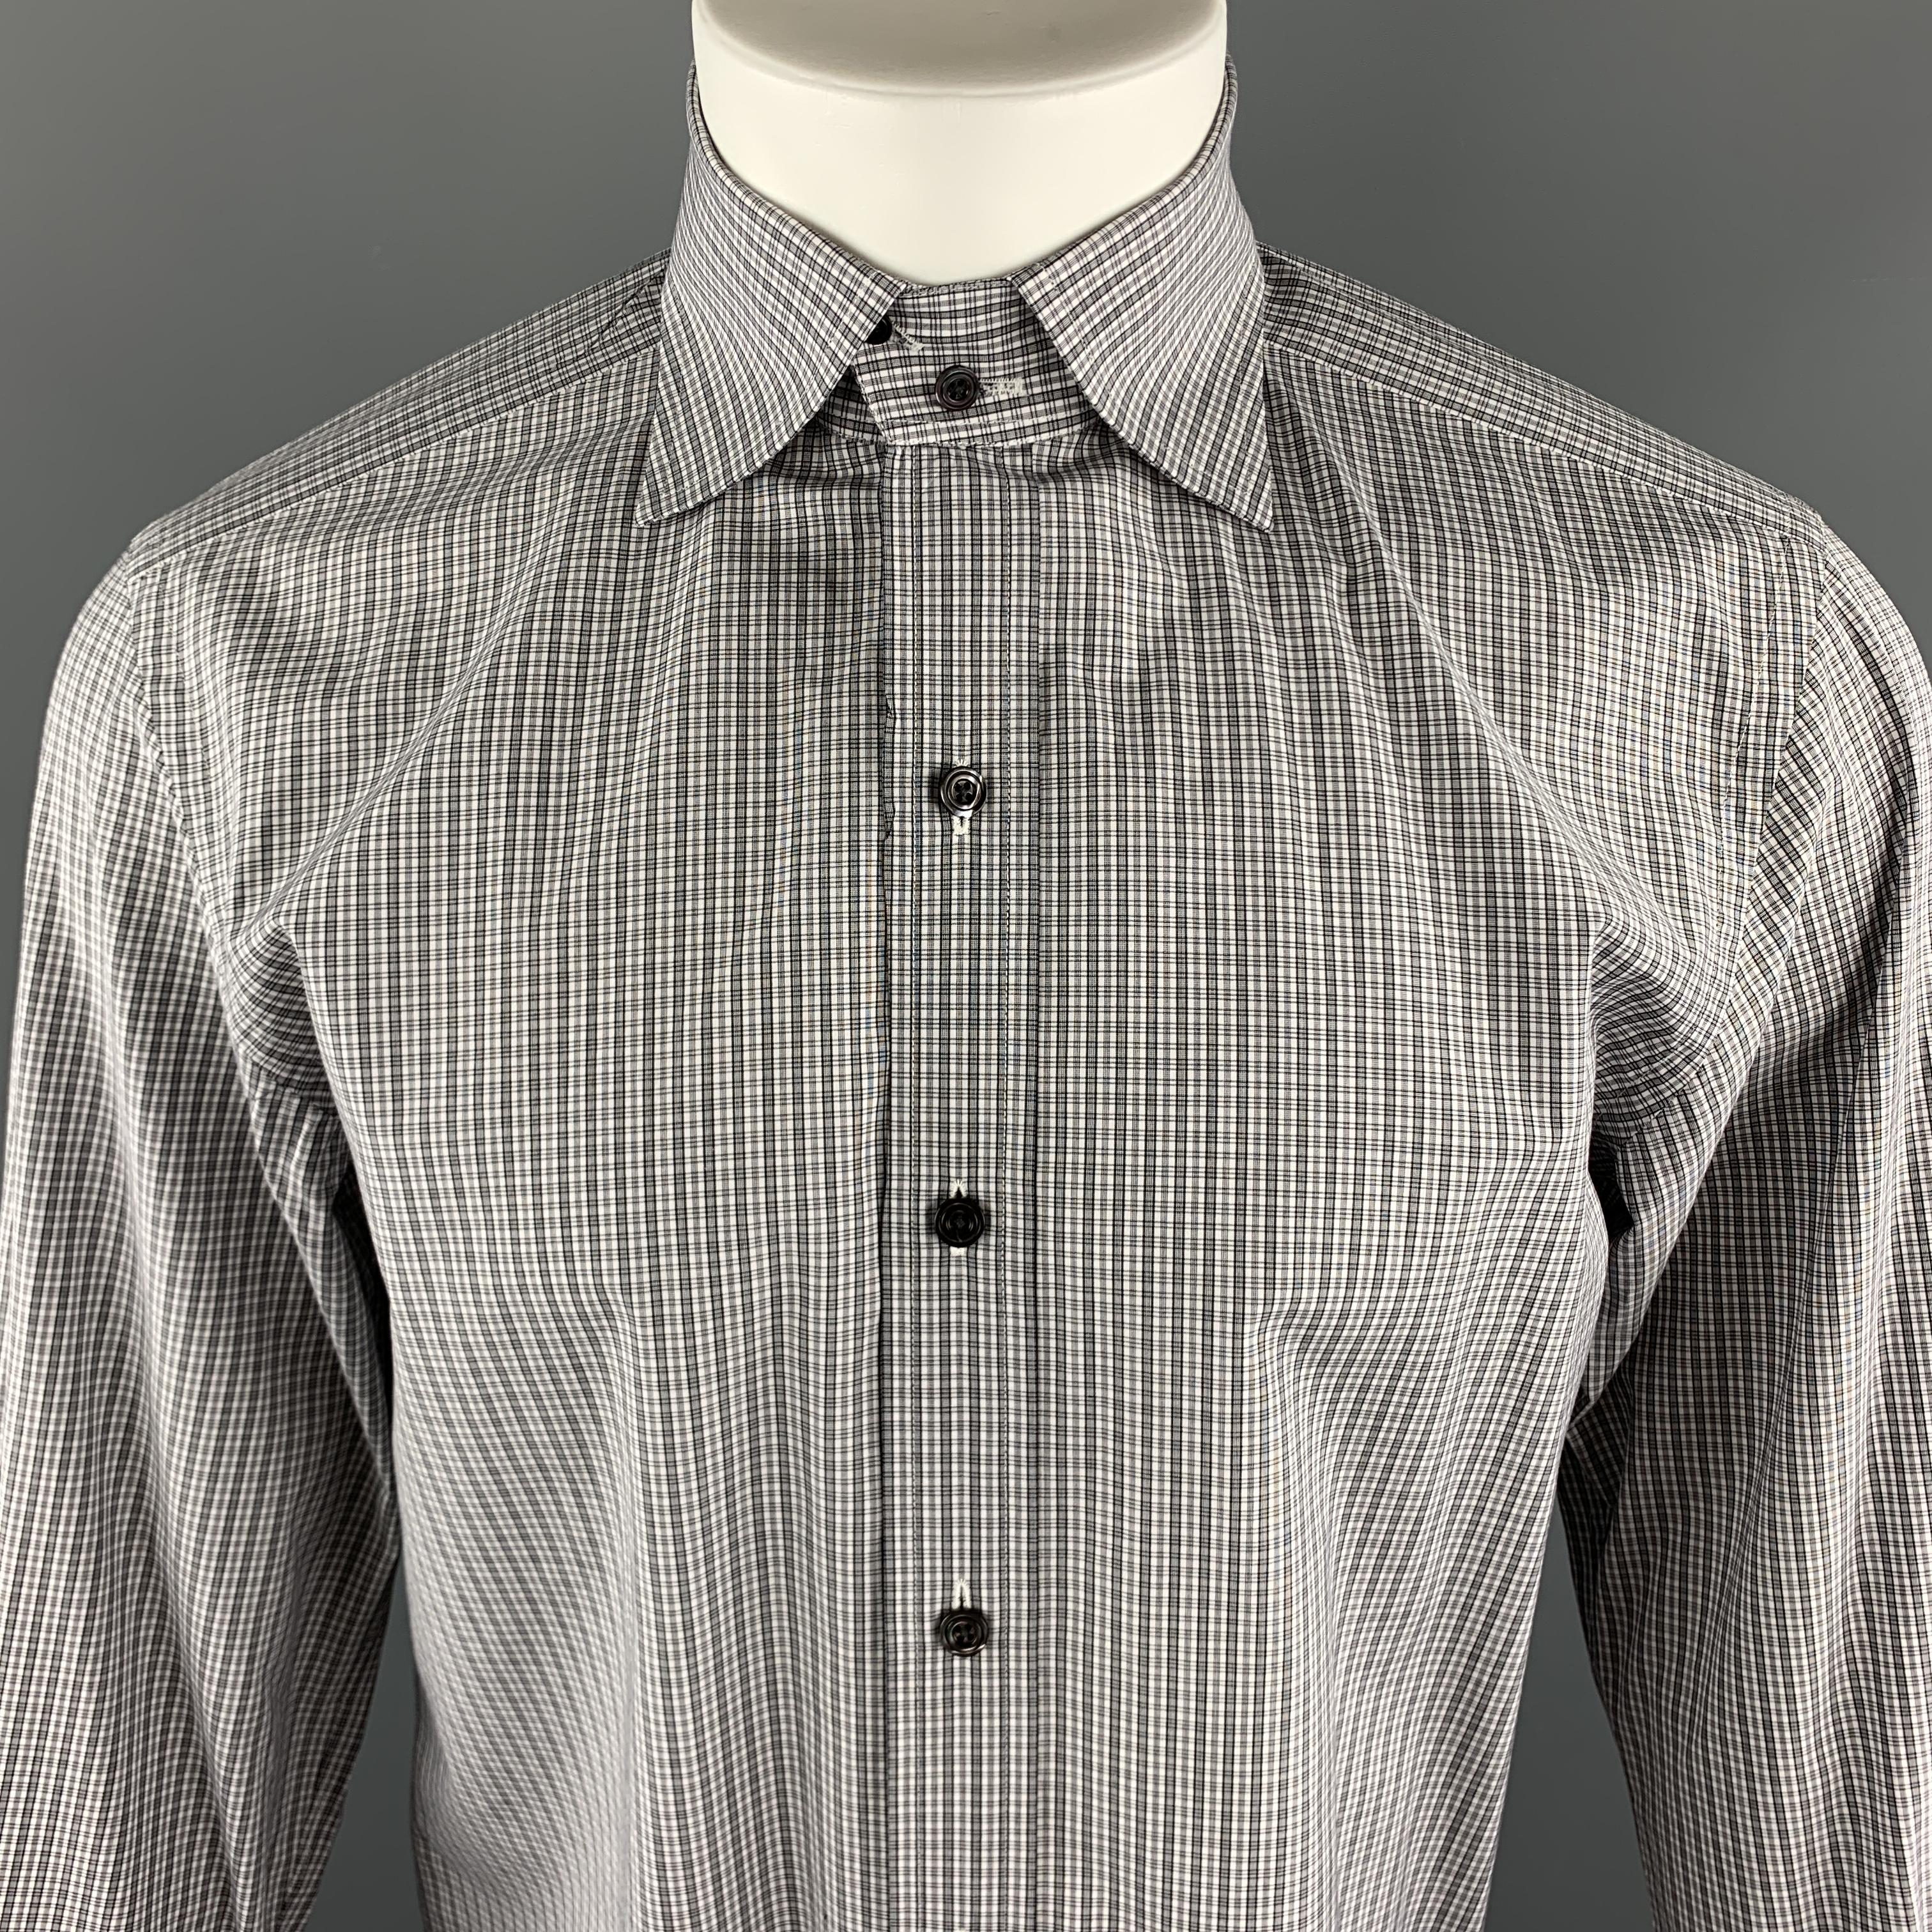 TOM FORD Long Sleeve Shirt comes in a grey plaid cotton material, with a double buttoned spread collar, French cuffs, button up. Made in Switzerland. 

Excellent Pre-Owned Condition.
Marked: 40   15 3/4

Measurements:

Shoulder: 17.5 in.
Chest: 42